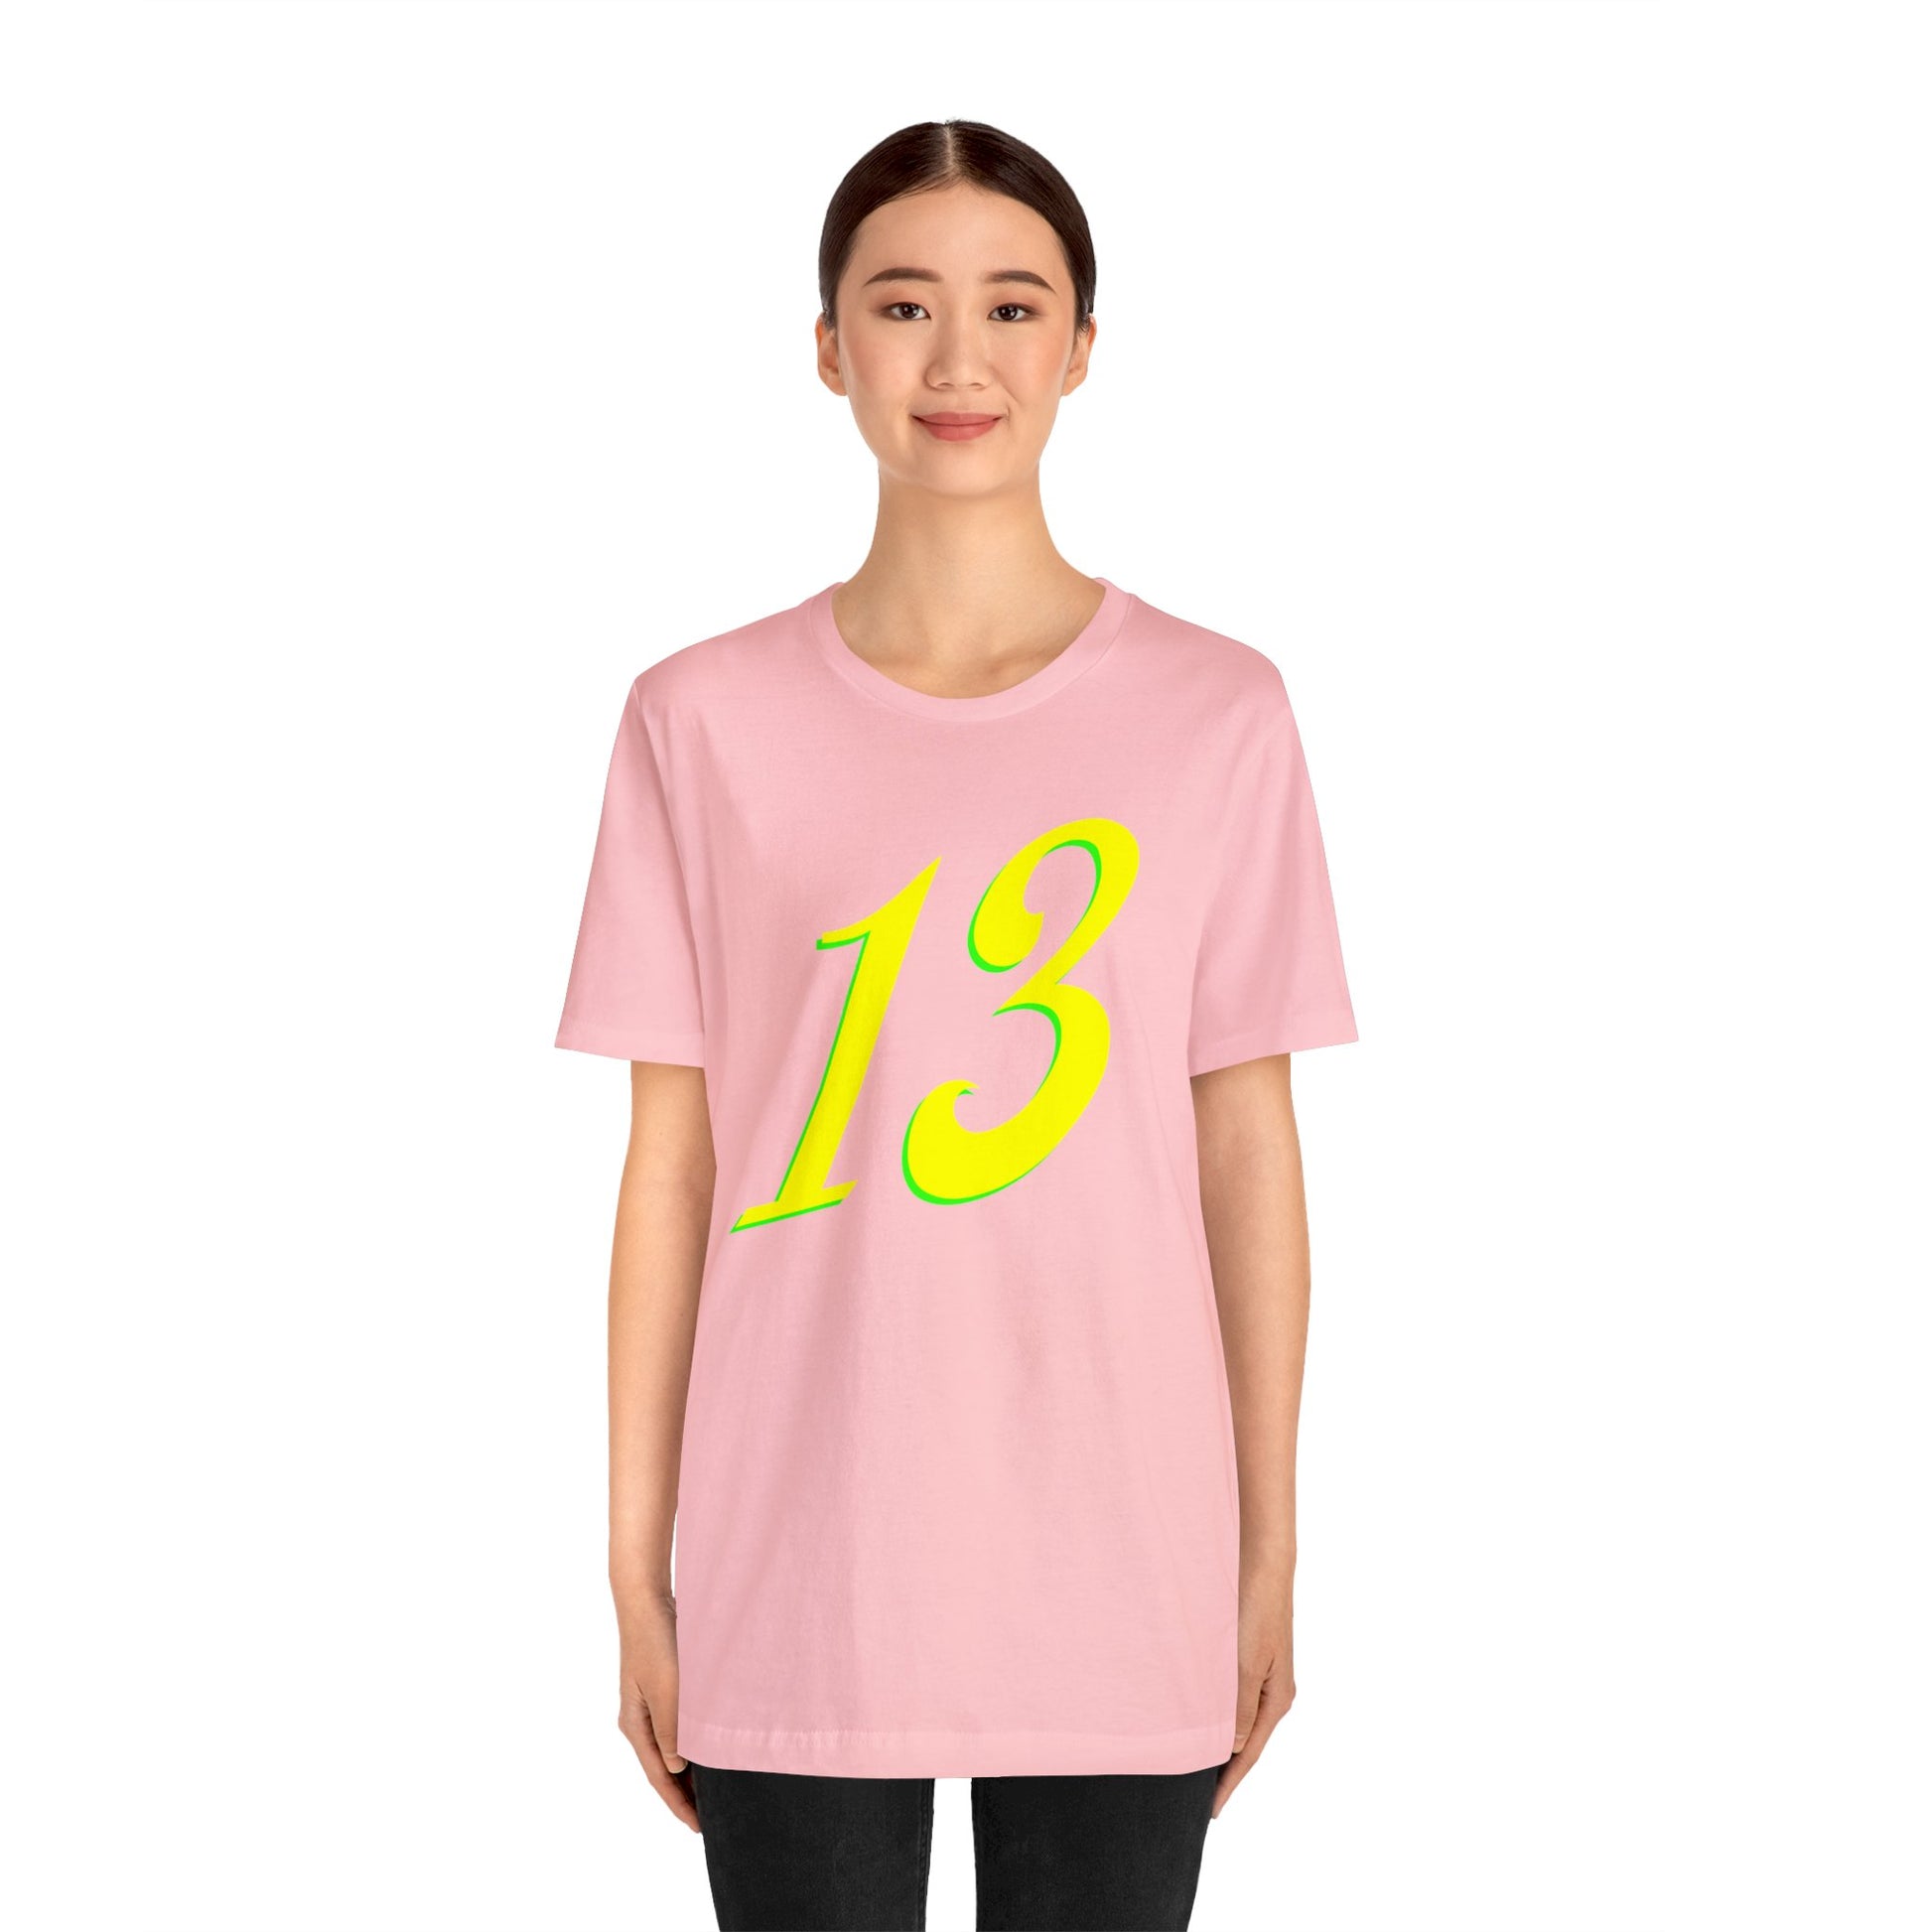 Number 13 Design - Soft Cotton Tee for birthdays and celebrations, Gift for friends and family, Multiple Options by clothezy.com in Asphalt Size Medium - Buy Now